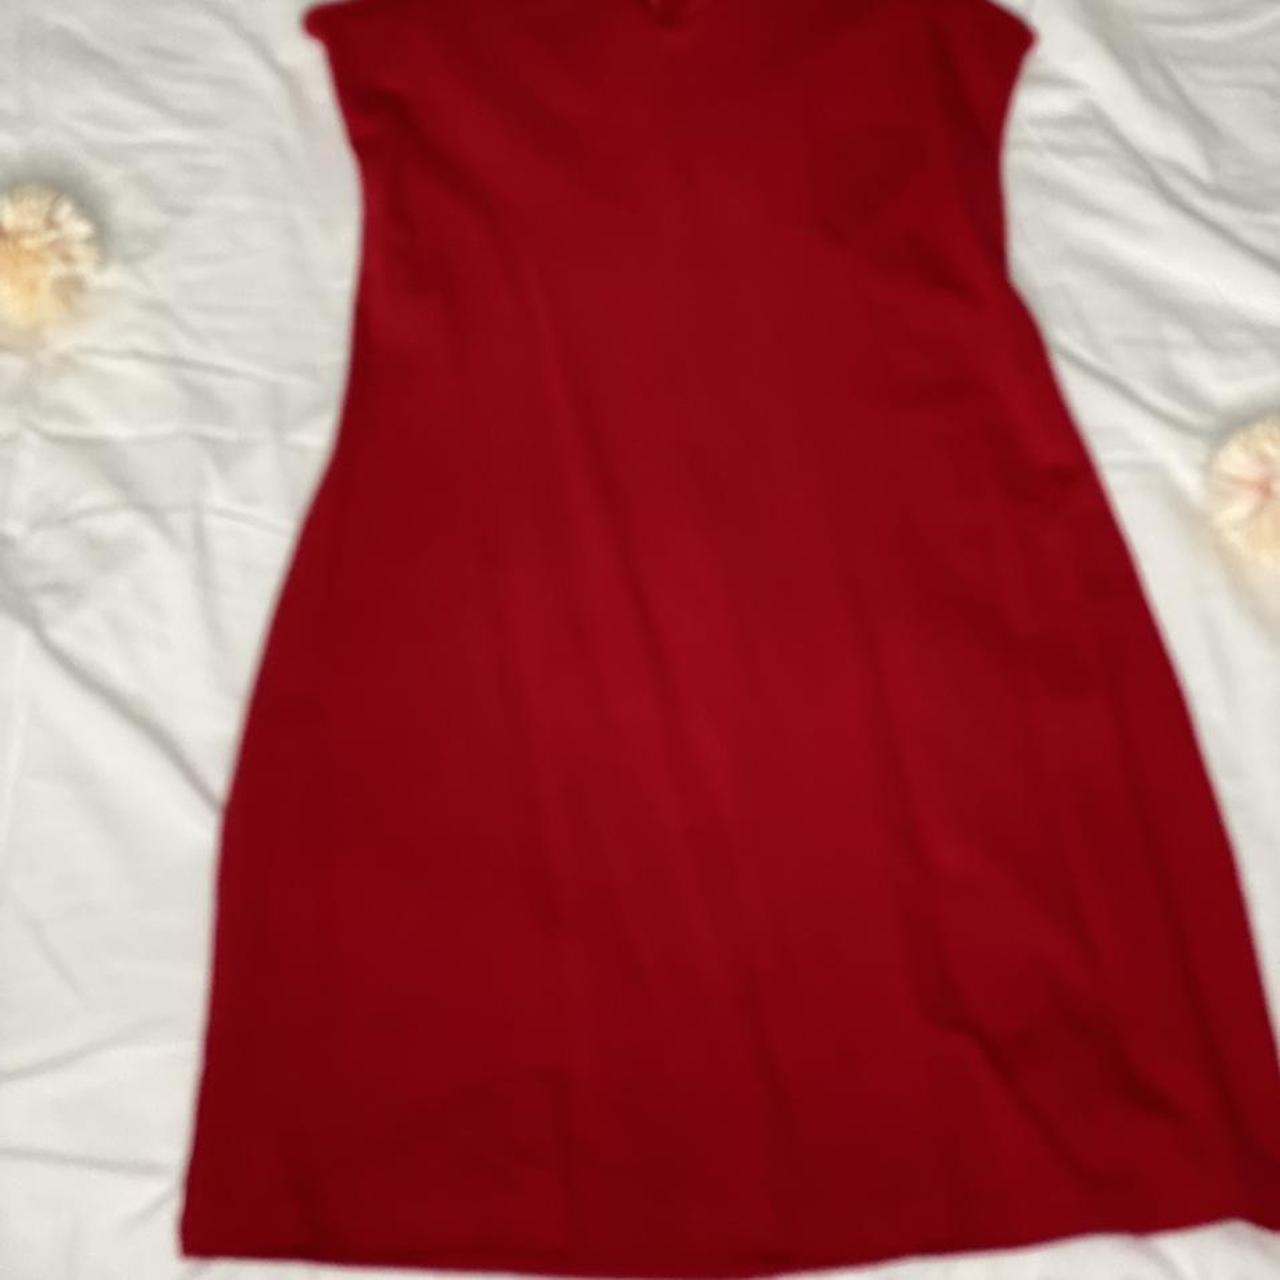 Product Image 2 - Dress
Worn once 
Excellent conditions